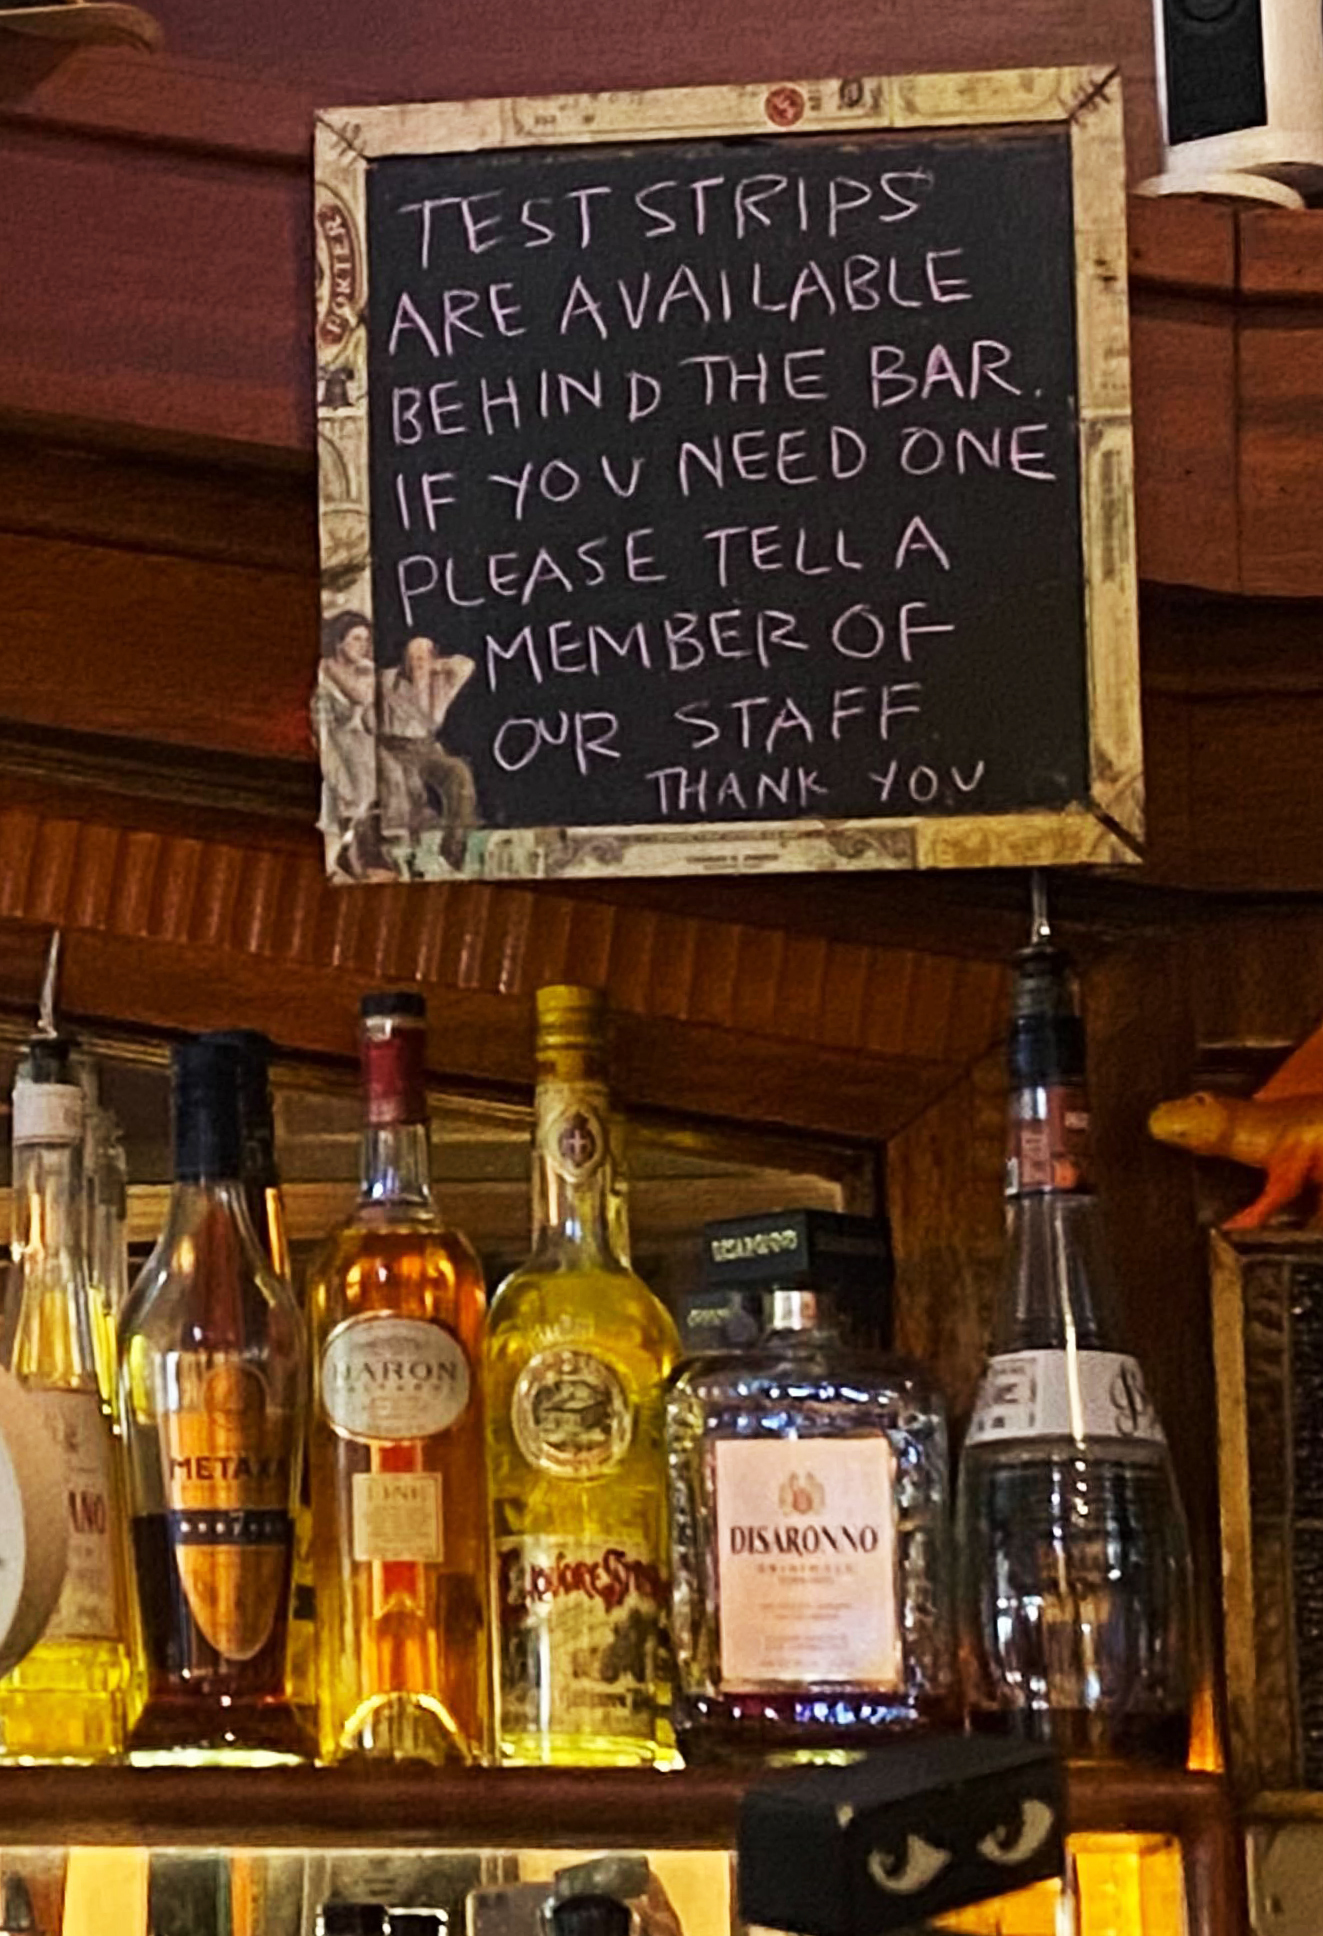 A sign above a bar reads: &quot;Test strips are available behind the bar. If you need one please tell a member of our staff. Thank you.&quot;